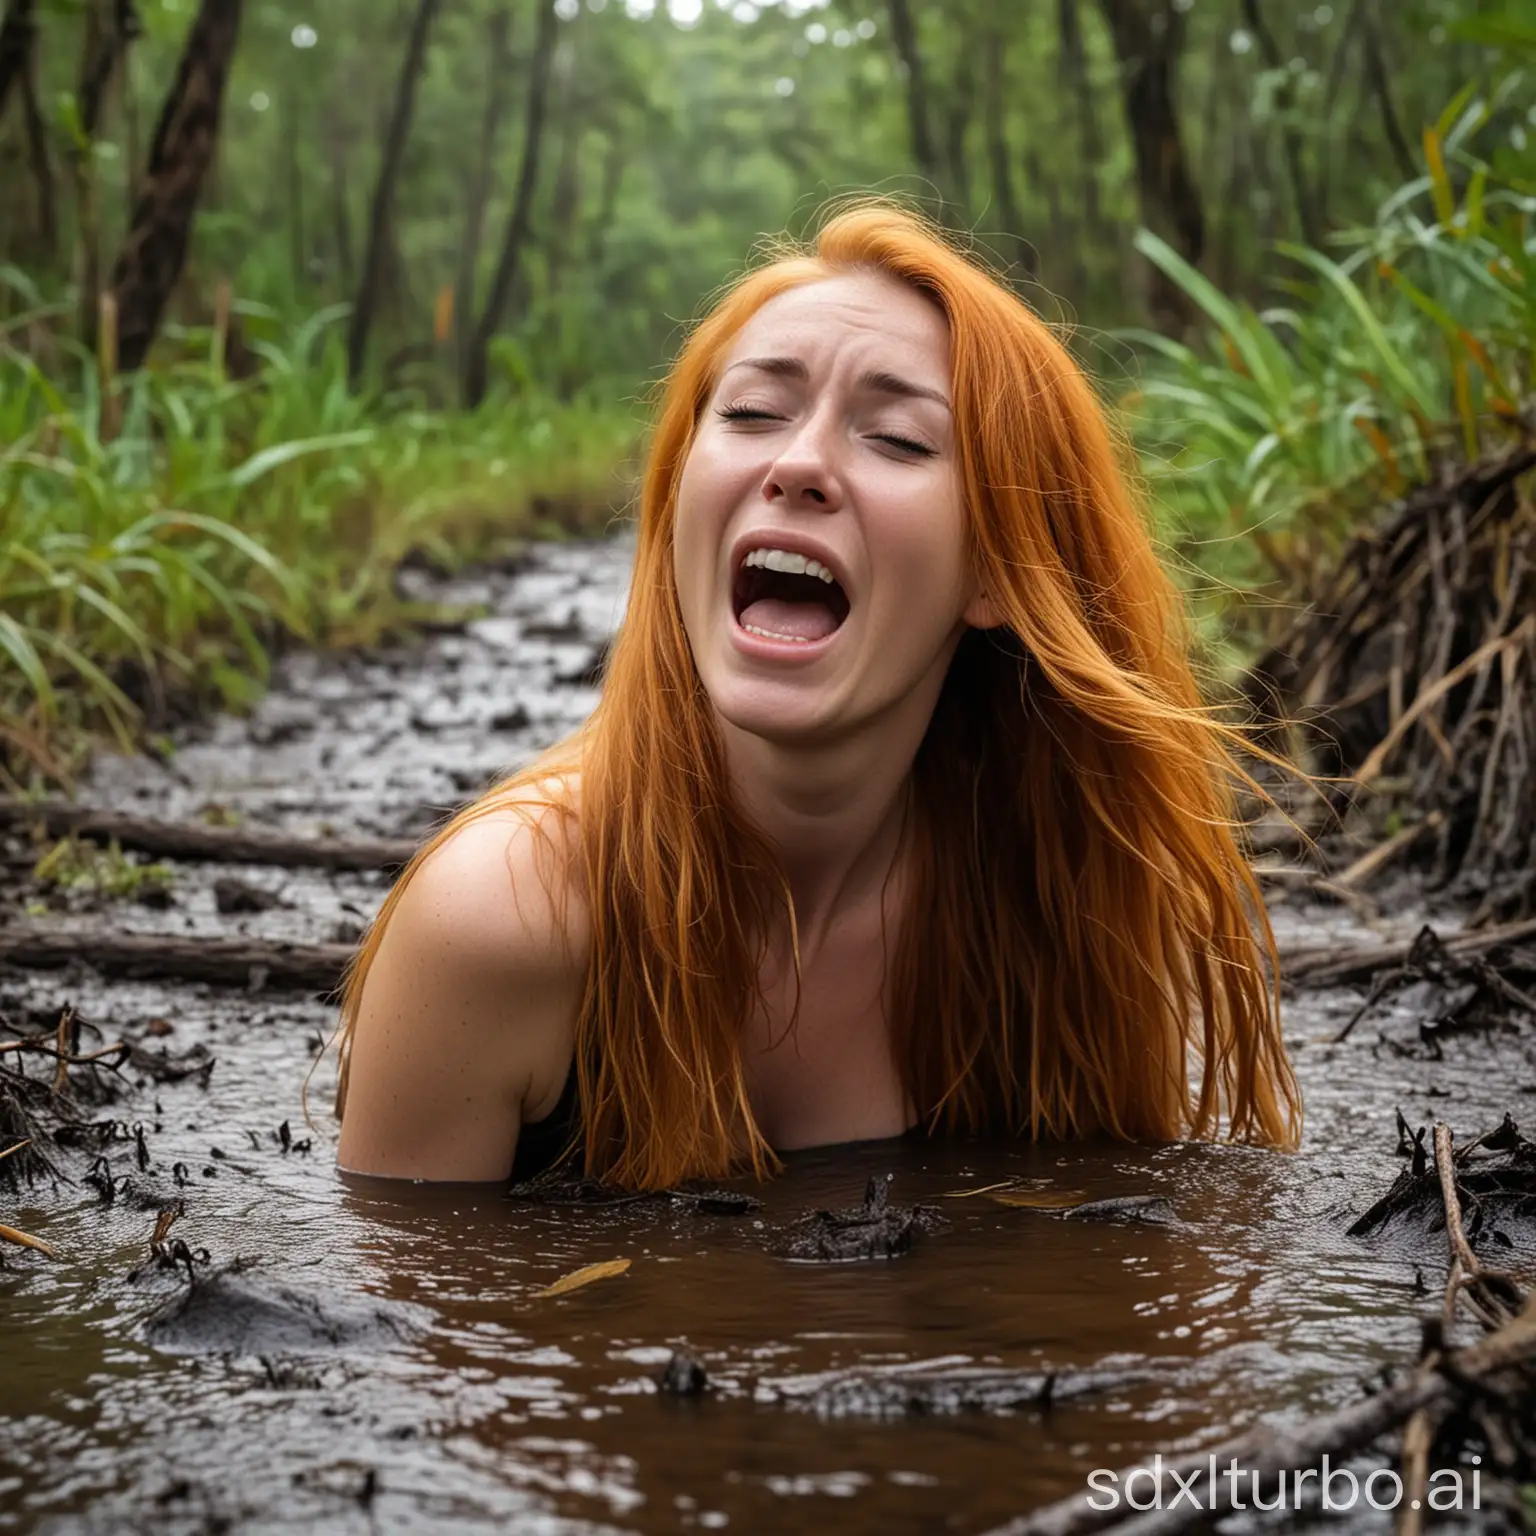 24 year old woman, Orange long hair, sinking in thick bog, jungle scenery, screaming and crying